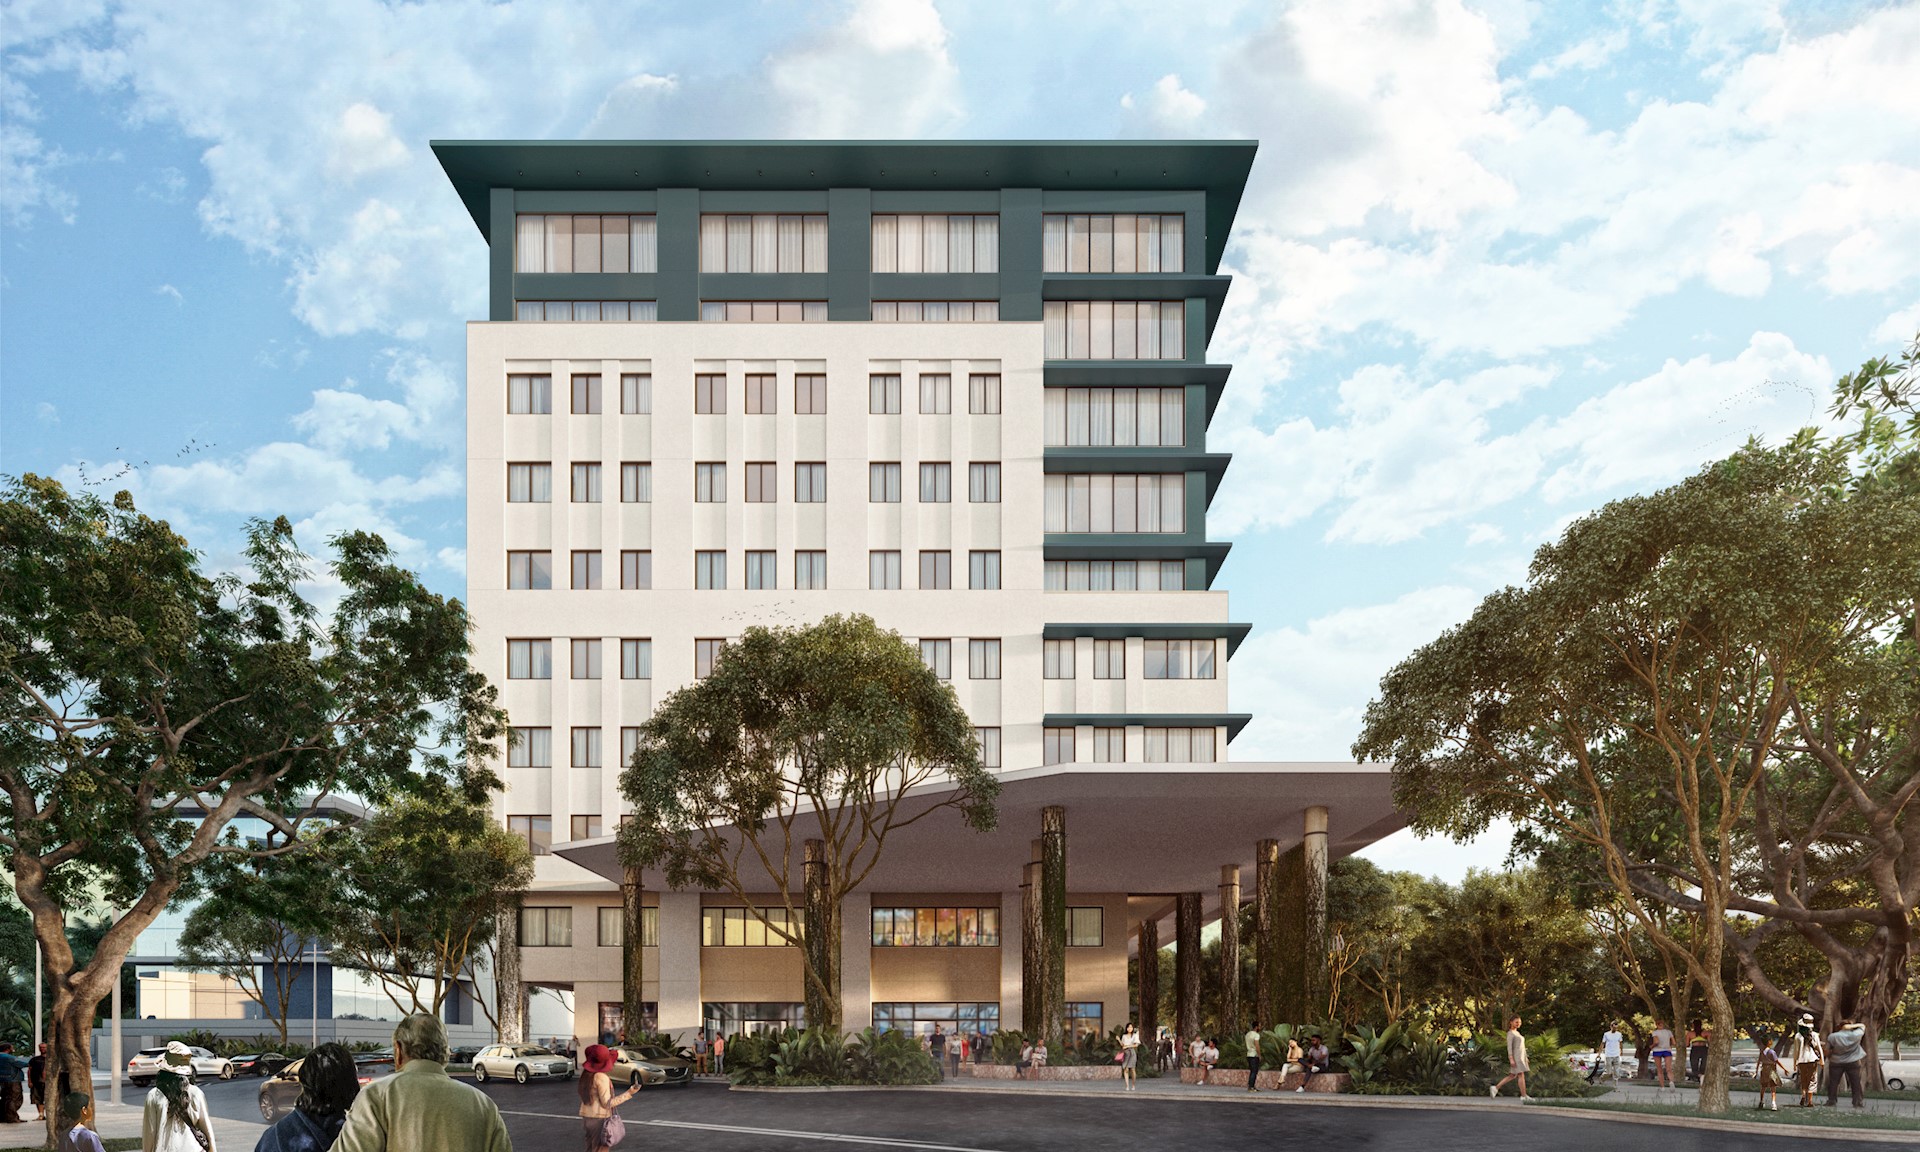 Camana Bay’s newest building 60 Nexus Way, offers retail opportunity